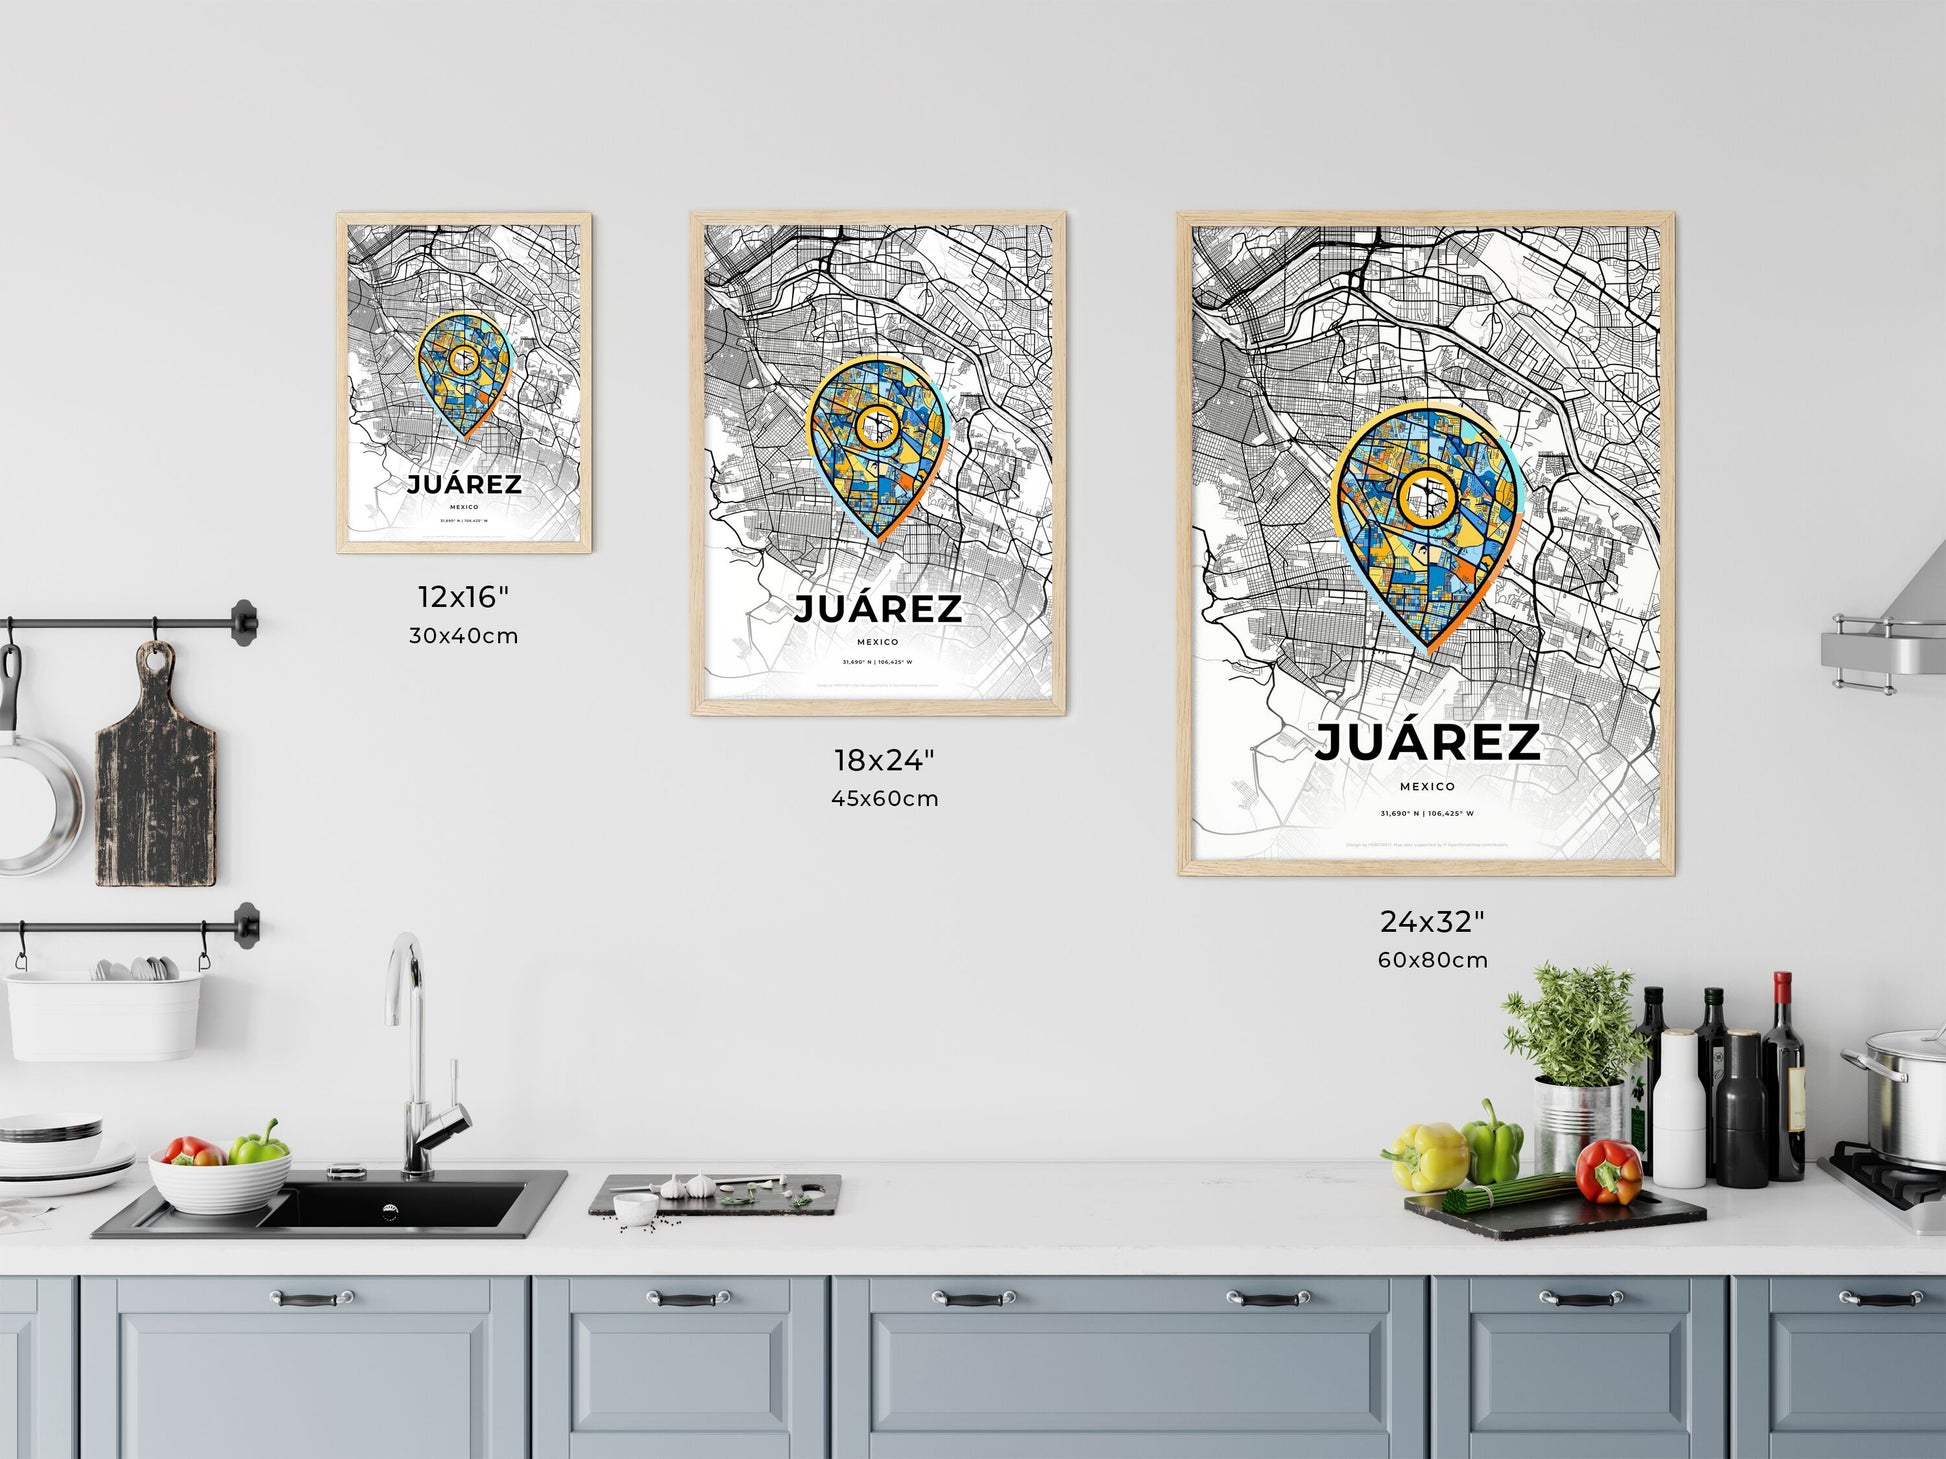 JUÁREZ MEXICO minimal art map with a colorful icon. Where it all began, Couple map gift.